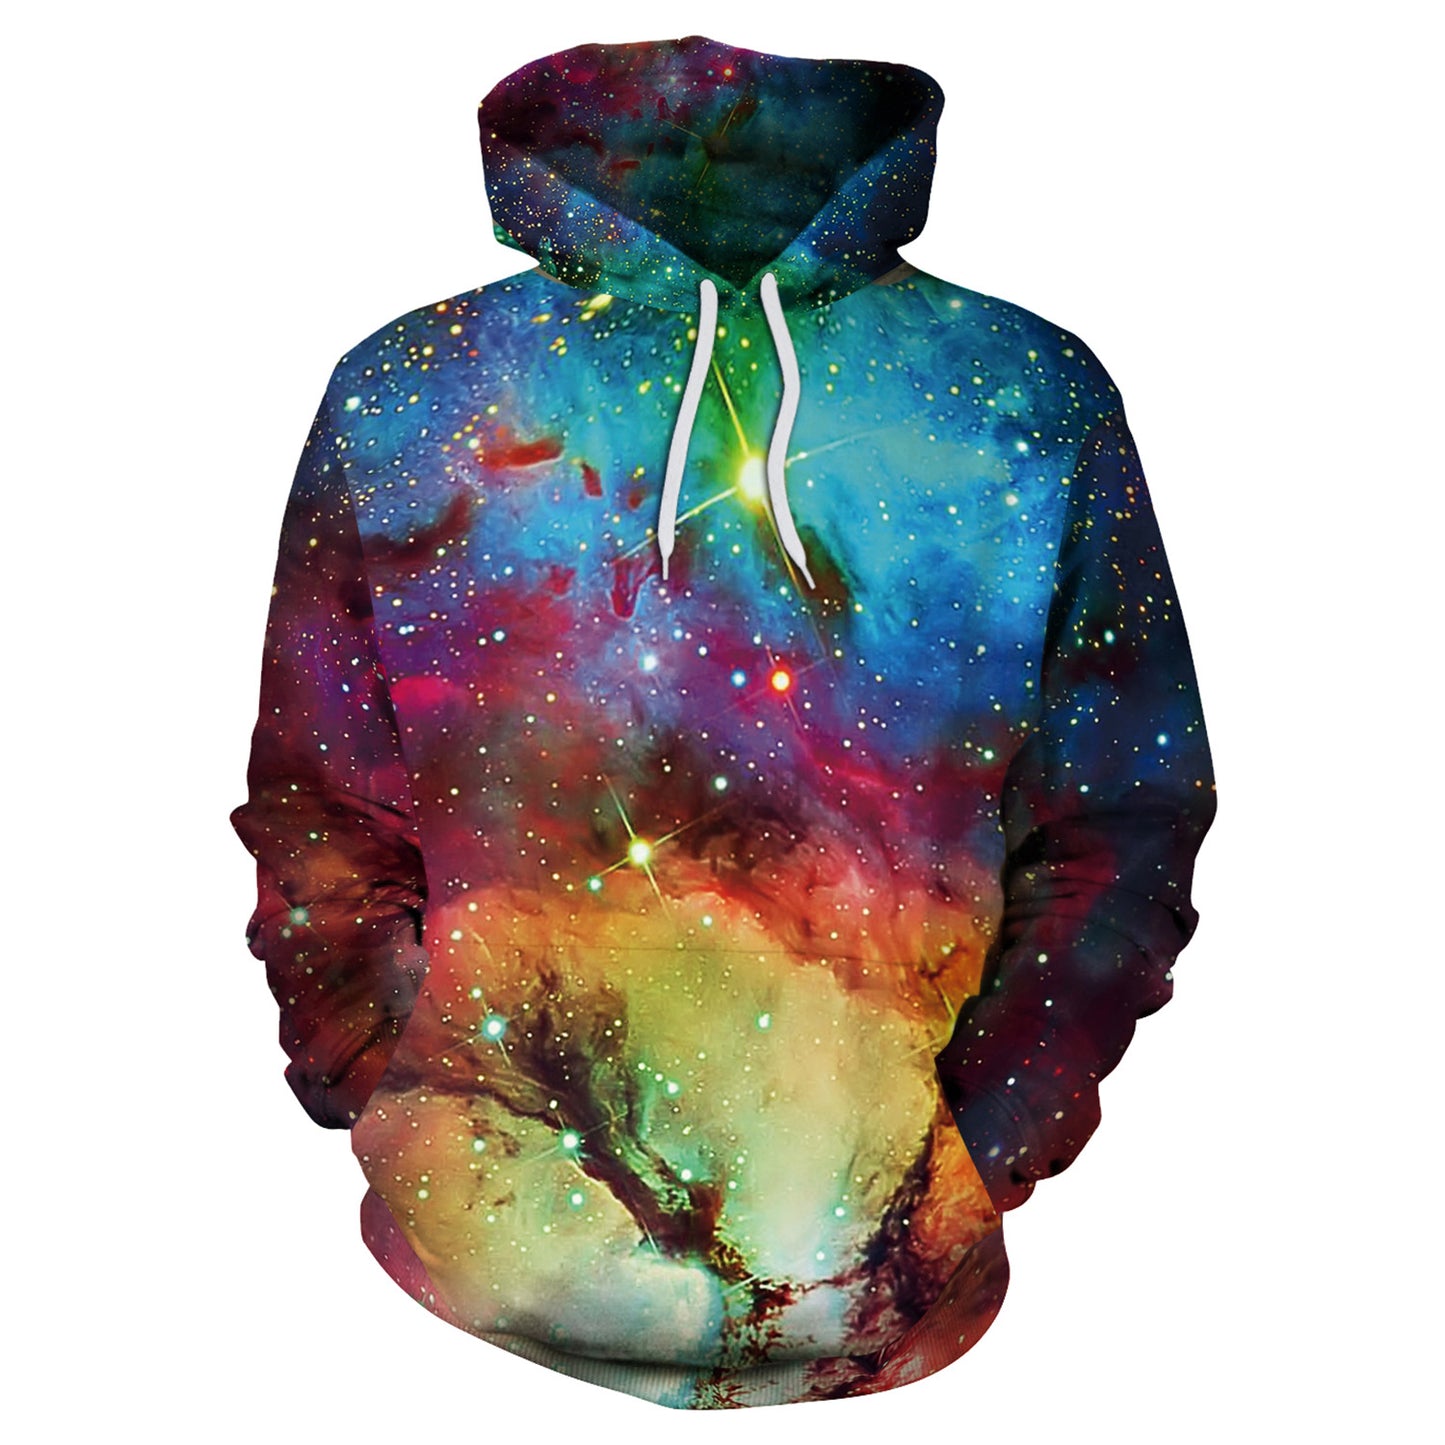 3d Psychedelic Hoodies Trippy Graffiti Printed Hoodie Sweaters Color Painting Hooded Men Women Plus Size Sweat Outerwear